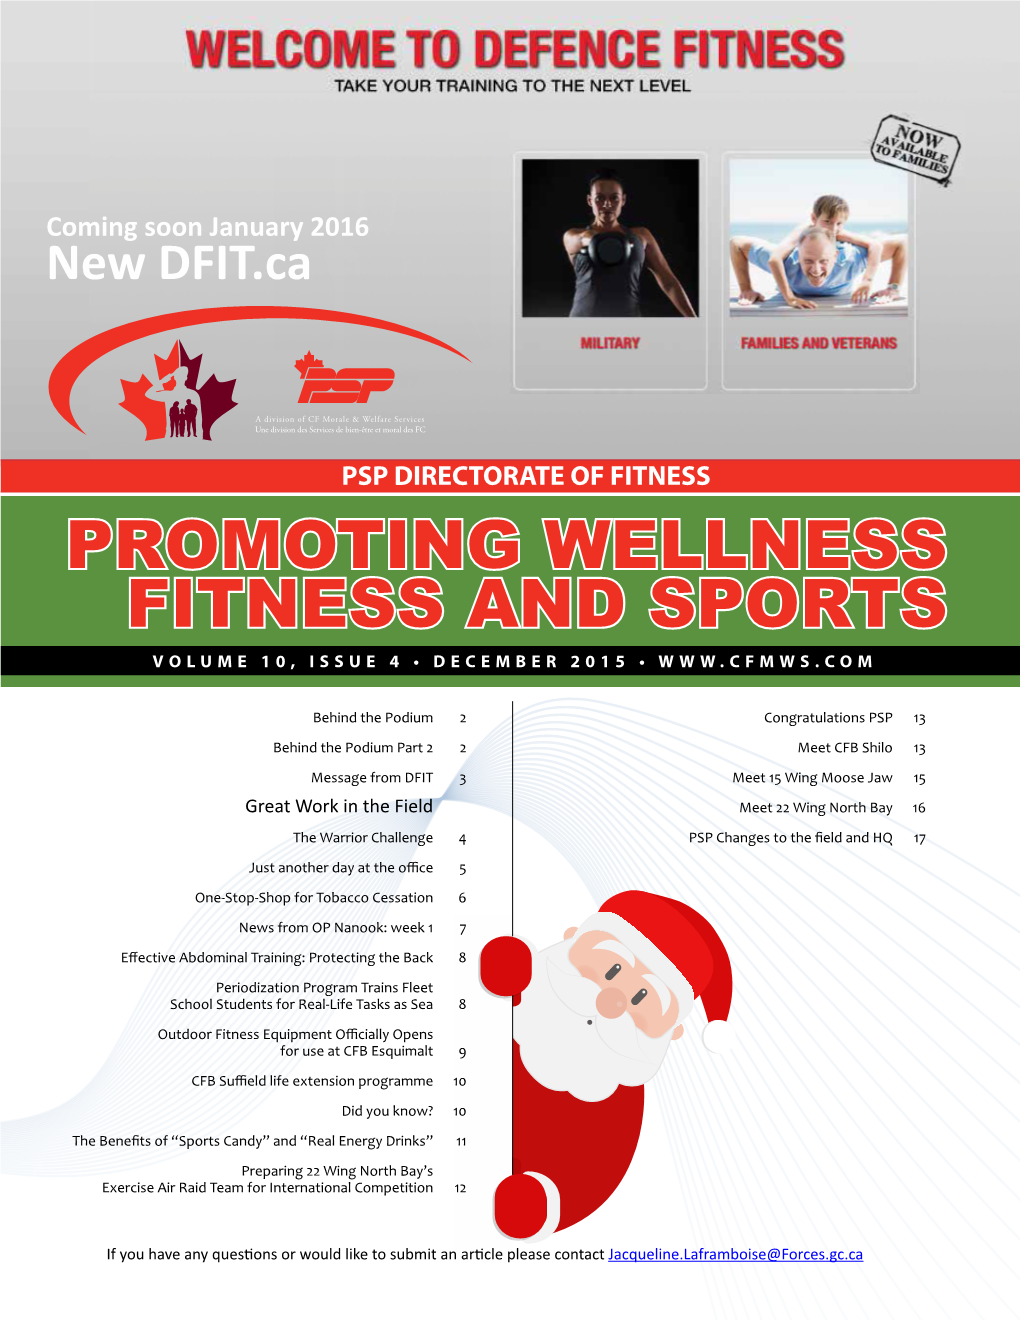 Promoting Wellness Fitness and Sports Volume 10, Issue 4 • December 2015 •